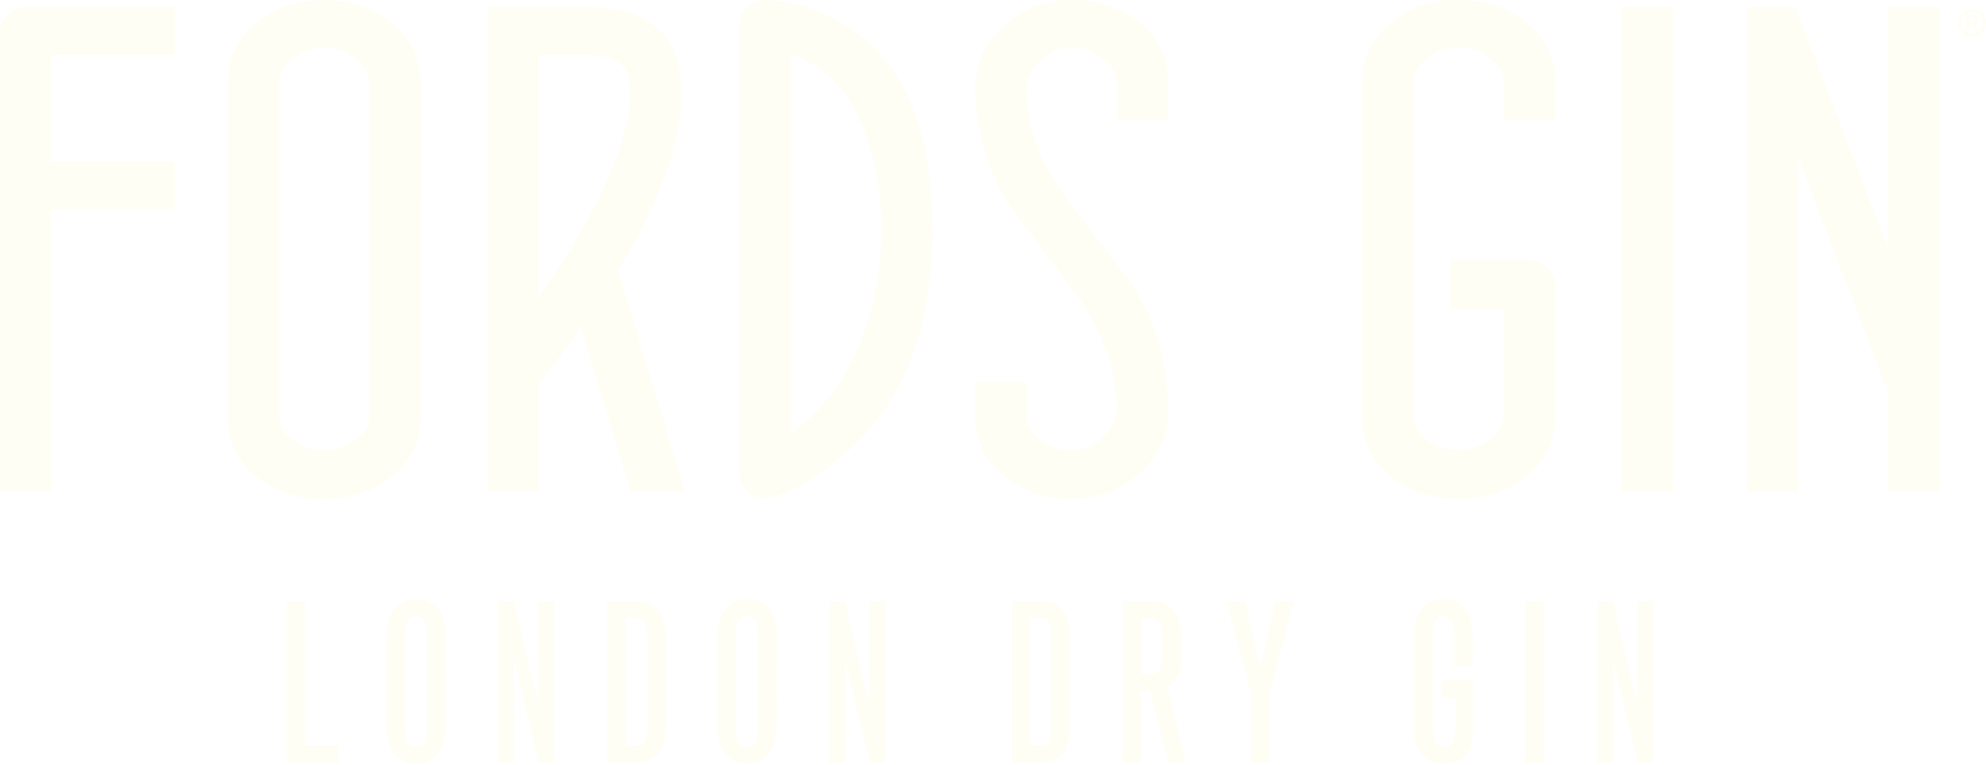 Fords Gin London Dry Gin Lettering